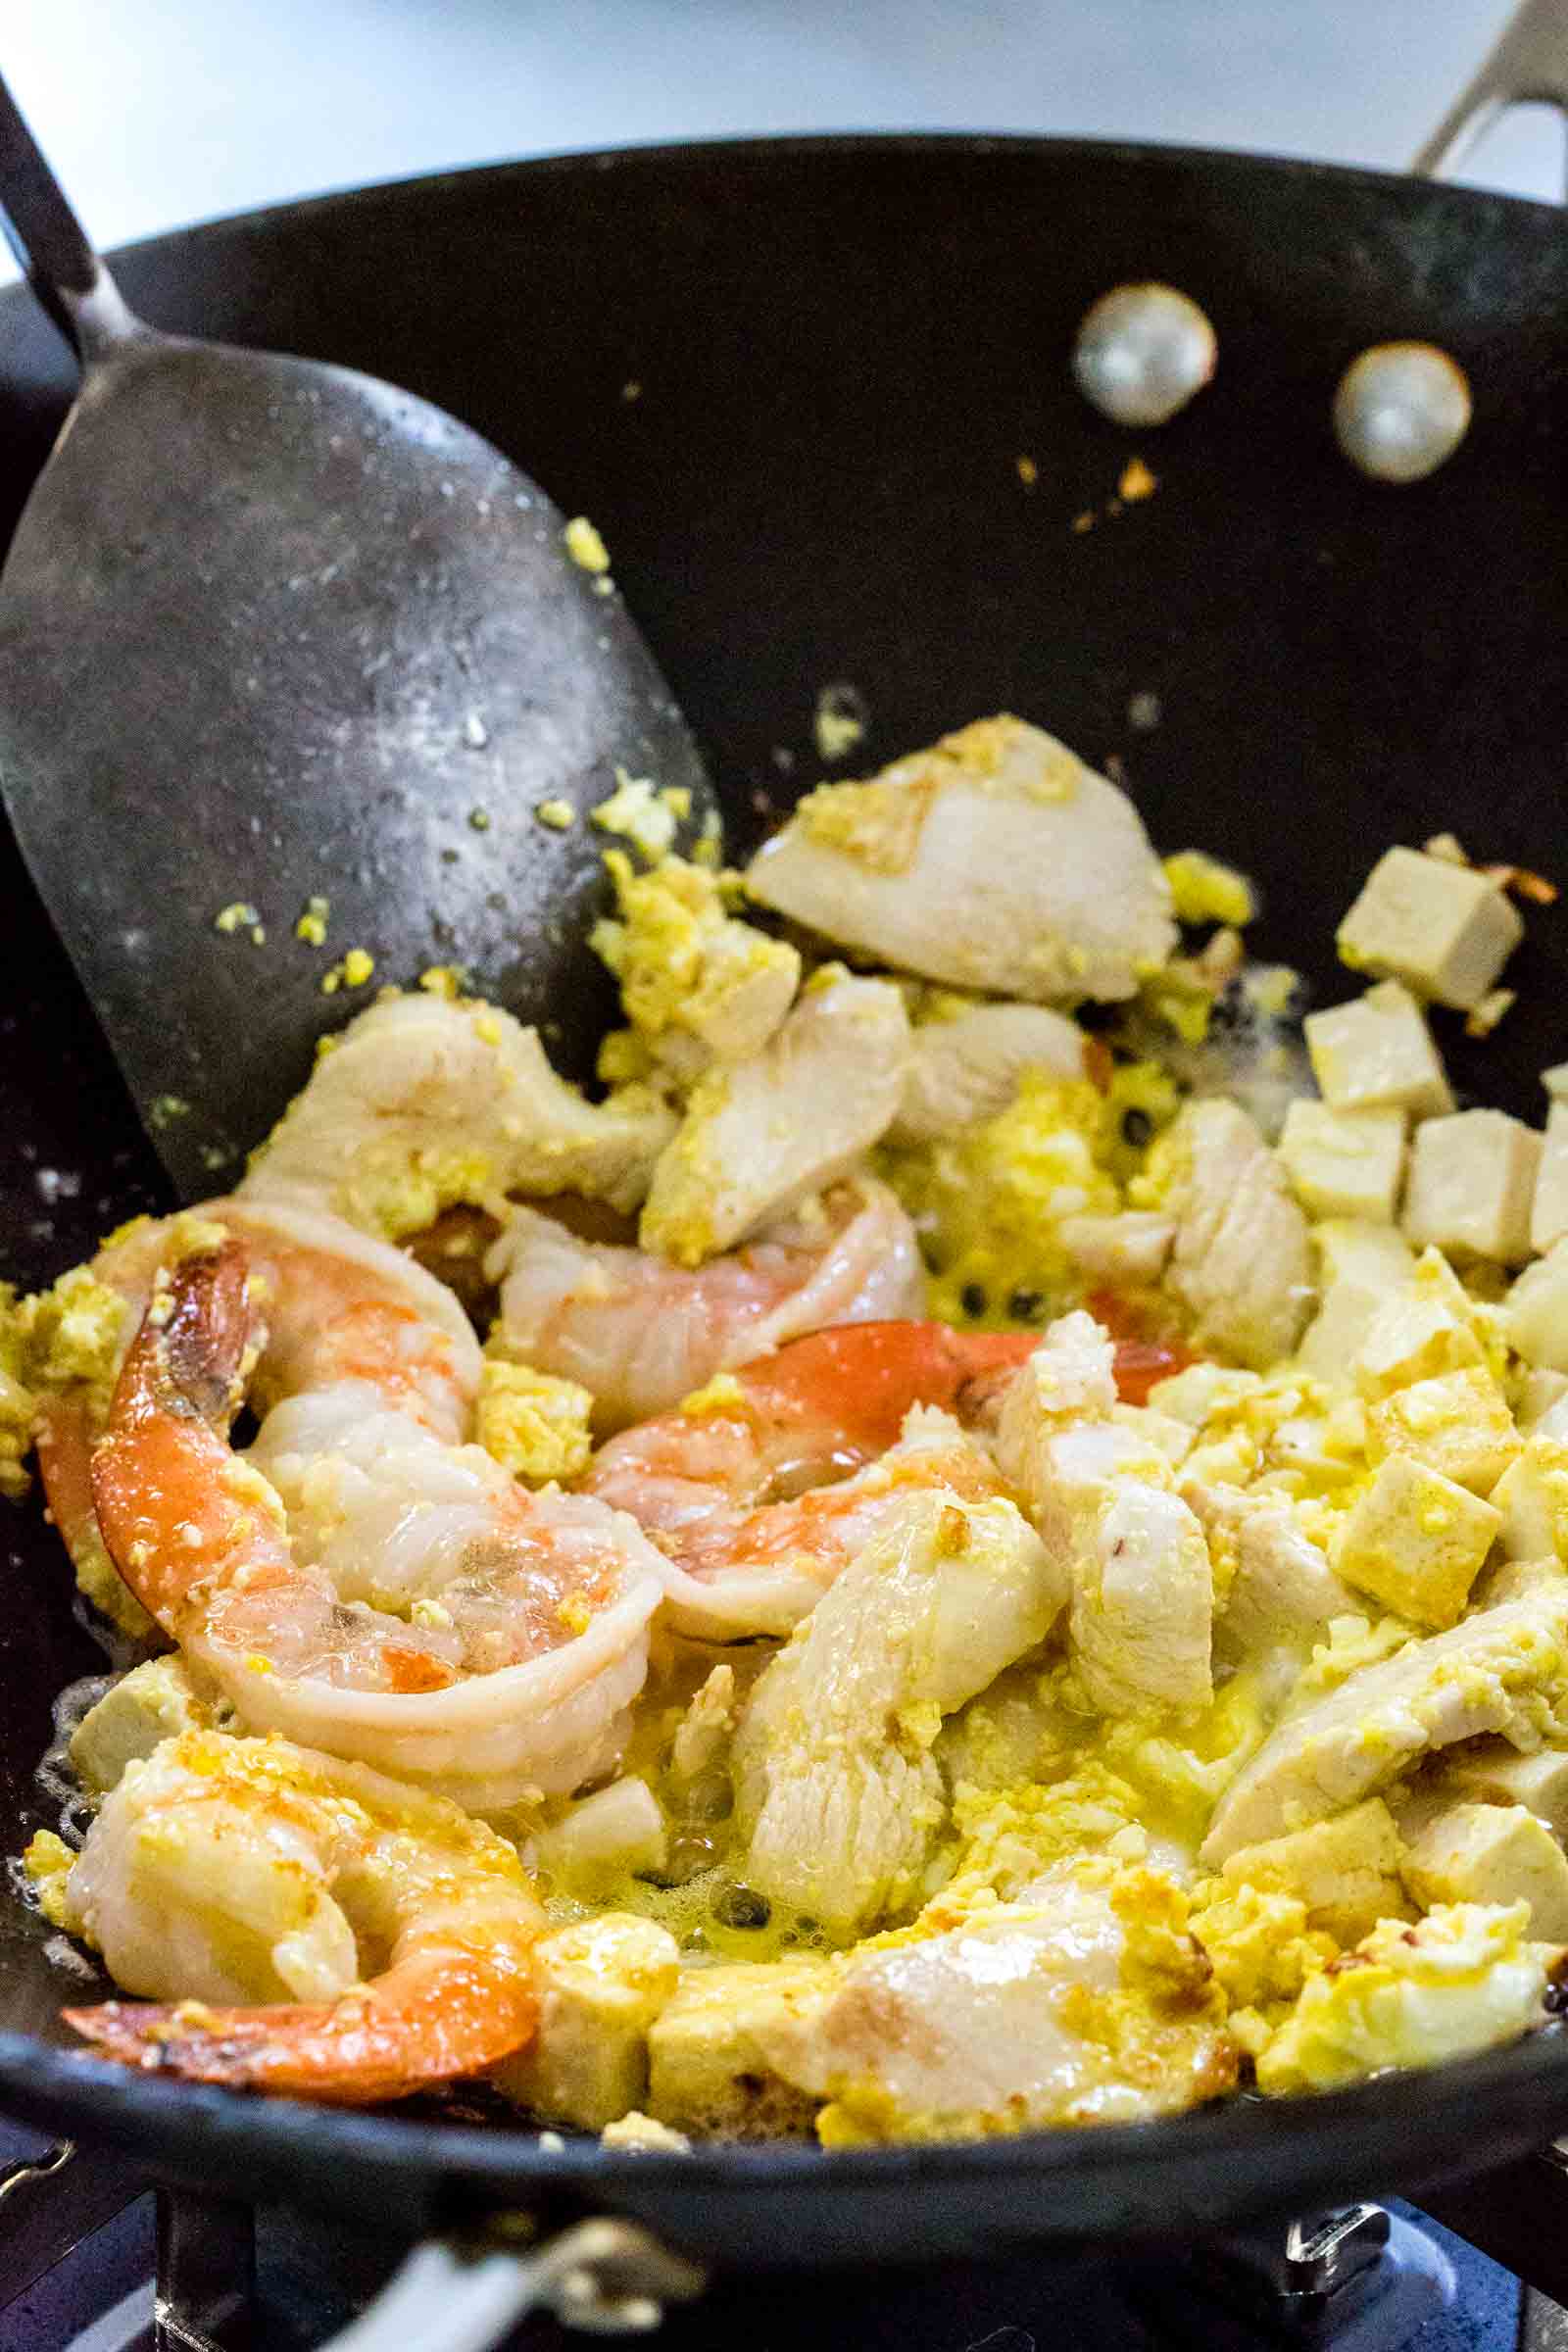 Spatula mixing chicken, shrimp, and eggs into the tofu